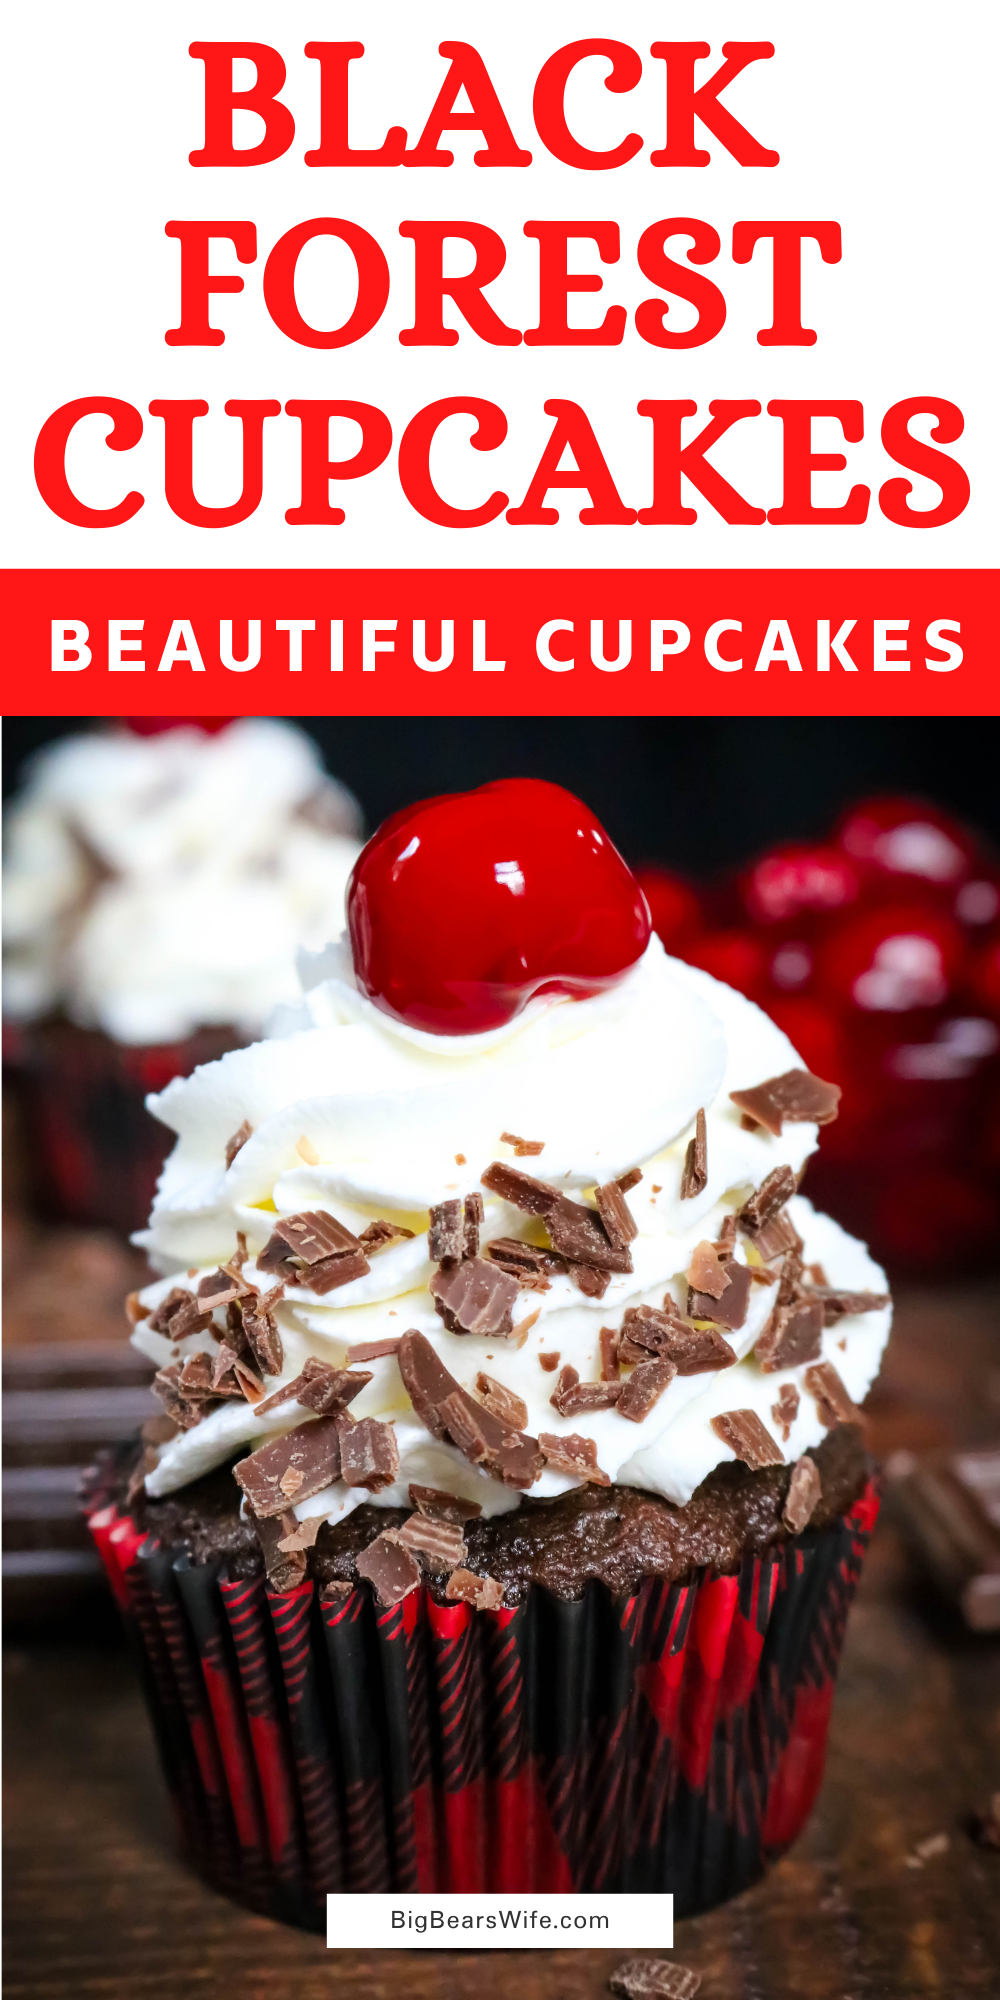  Chocolate and Cherry marry perfectly in these Black Forest Cupcakes! Chocolate cupcakes filled with cherry pie filling and topped with a homemade vanilla whipped cream frosting.  via @bigbearswife